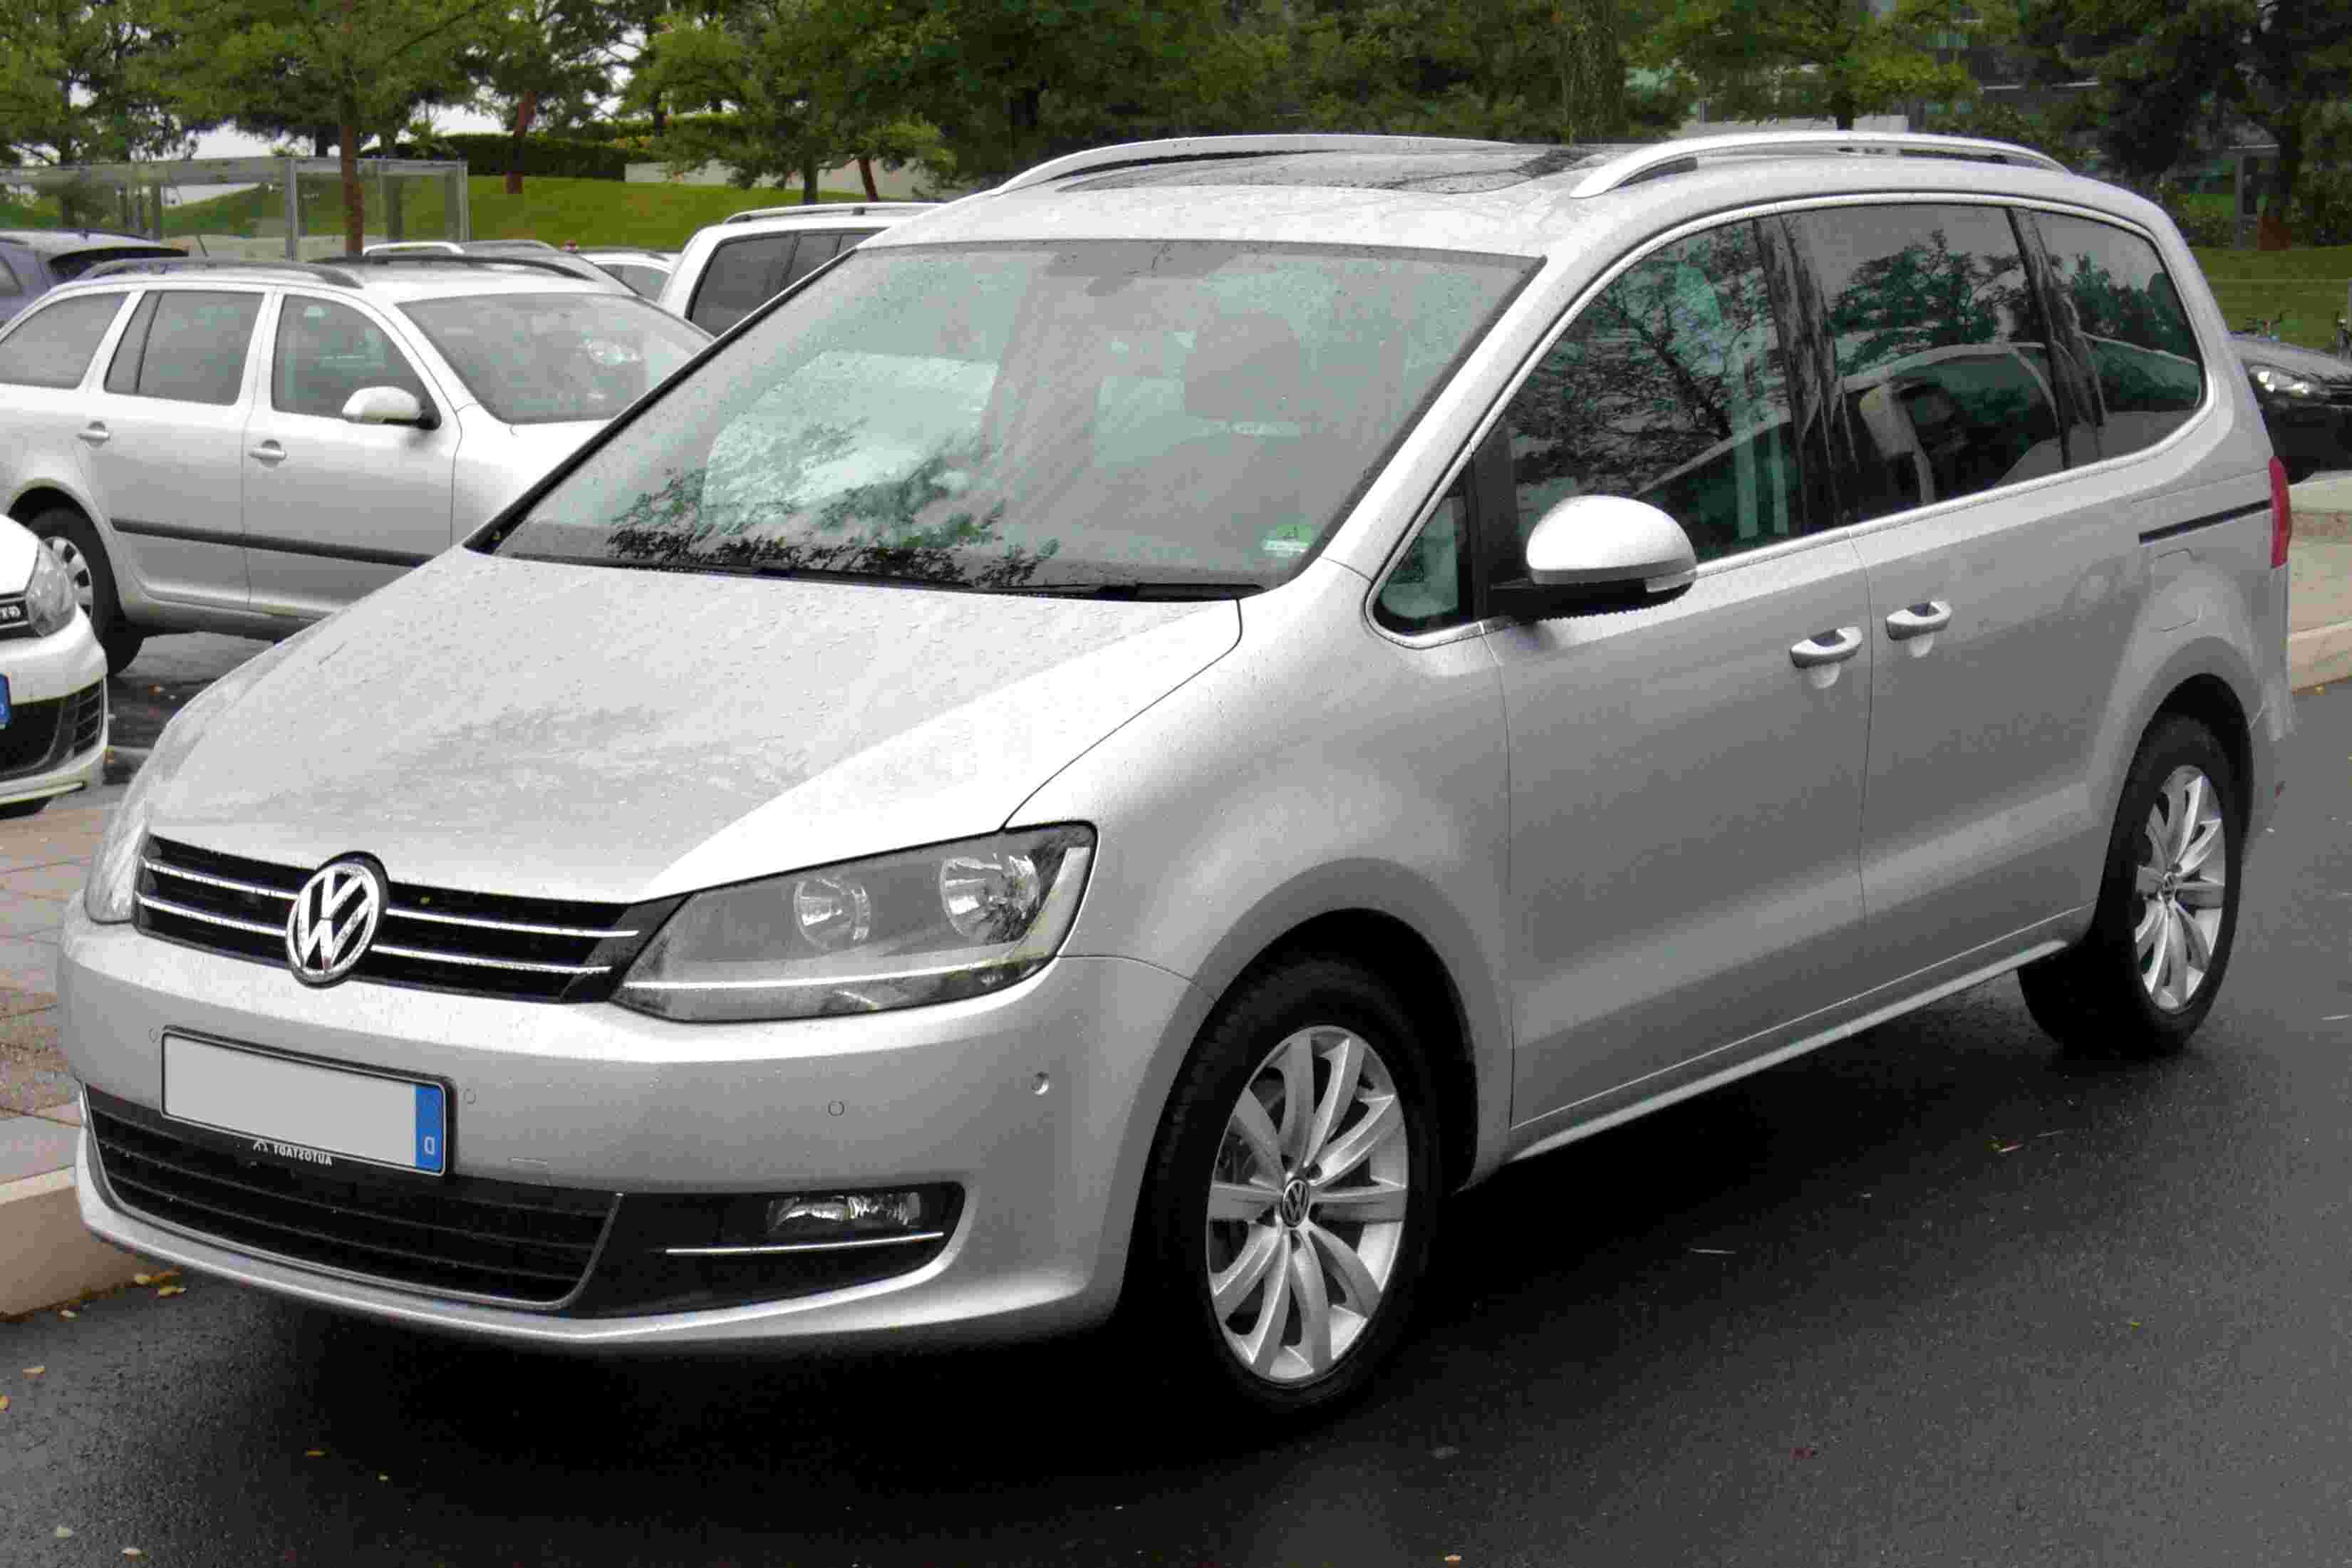 Vw Sharan 2012 for sale in UK 21 used Vw Sharan 2012